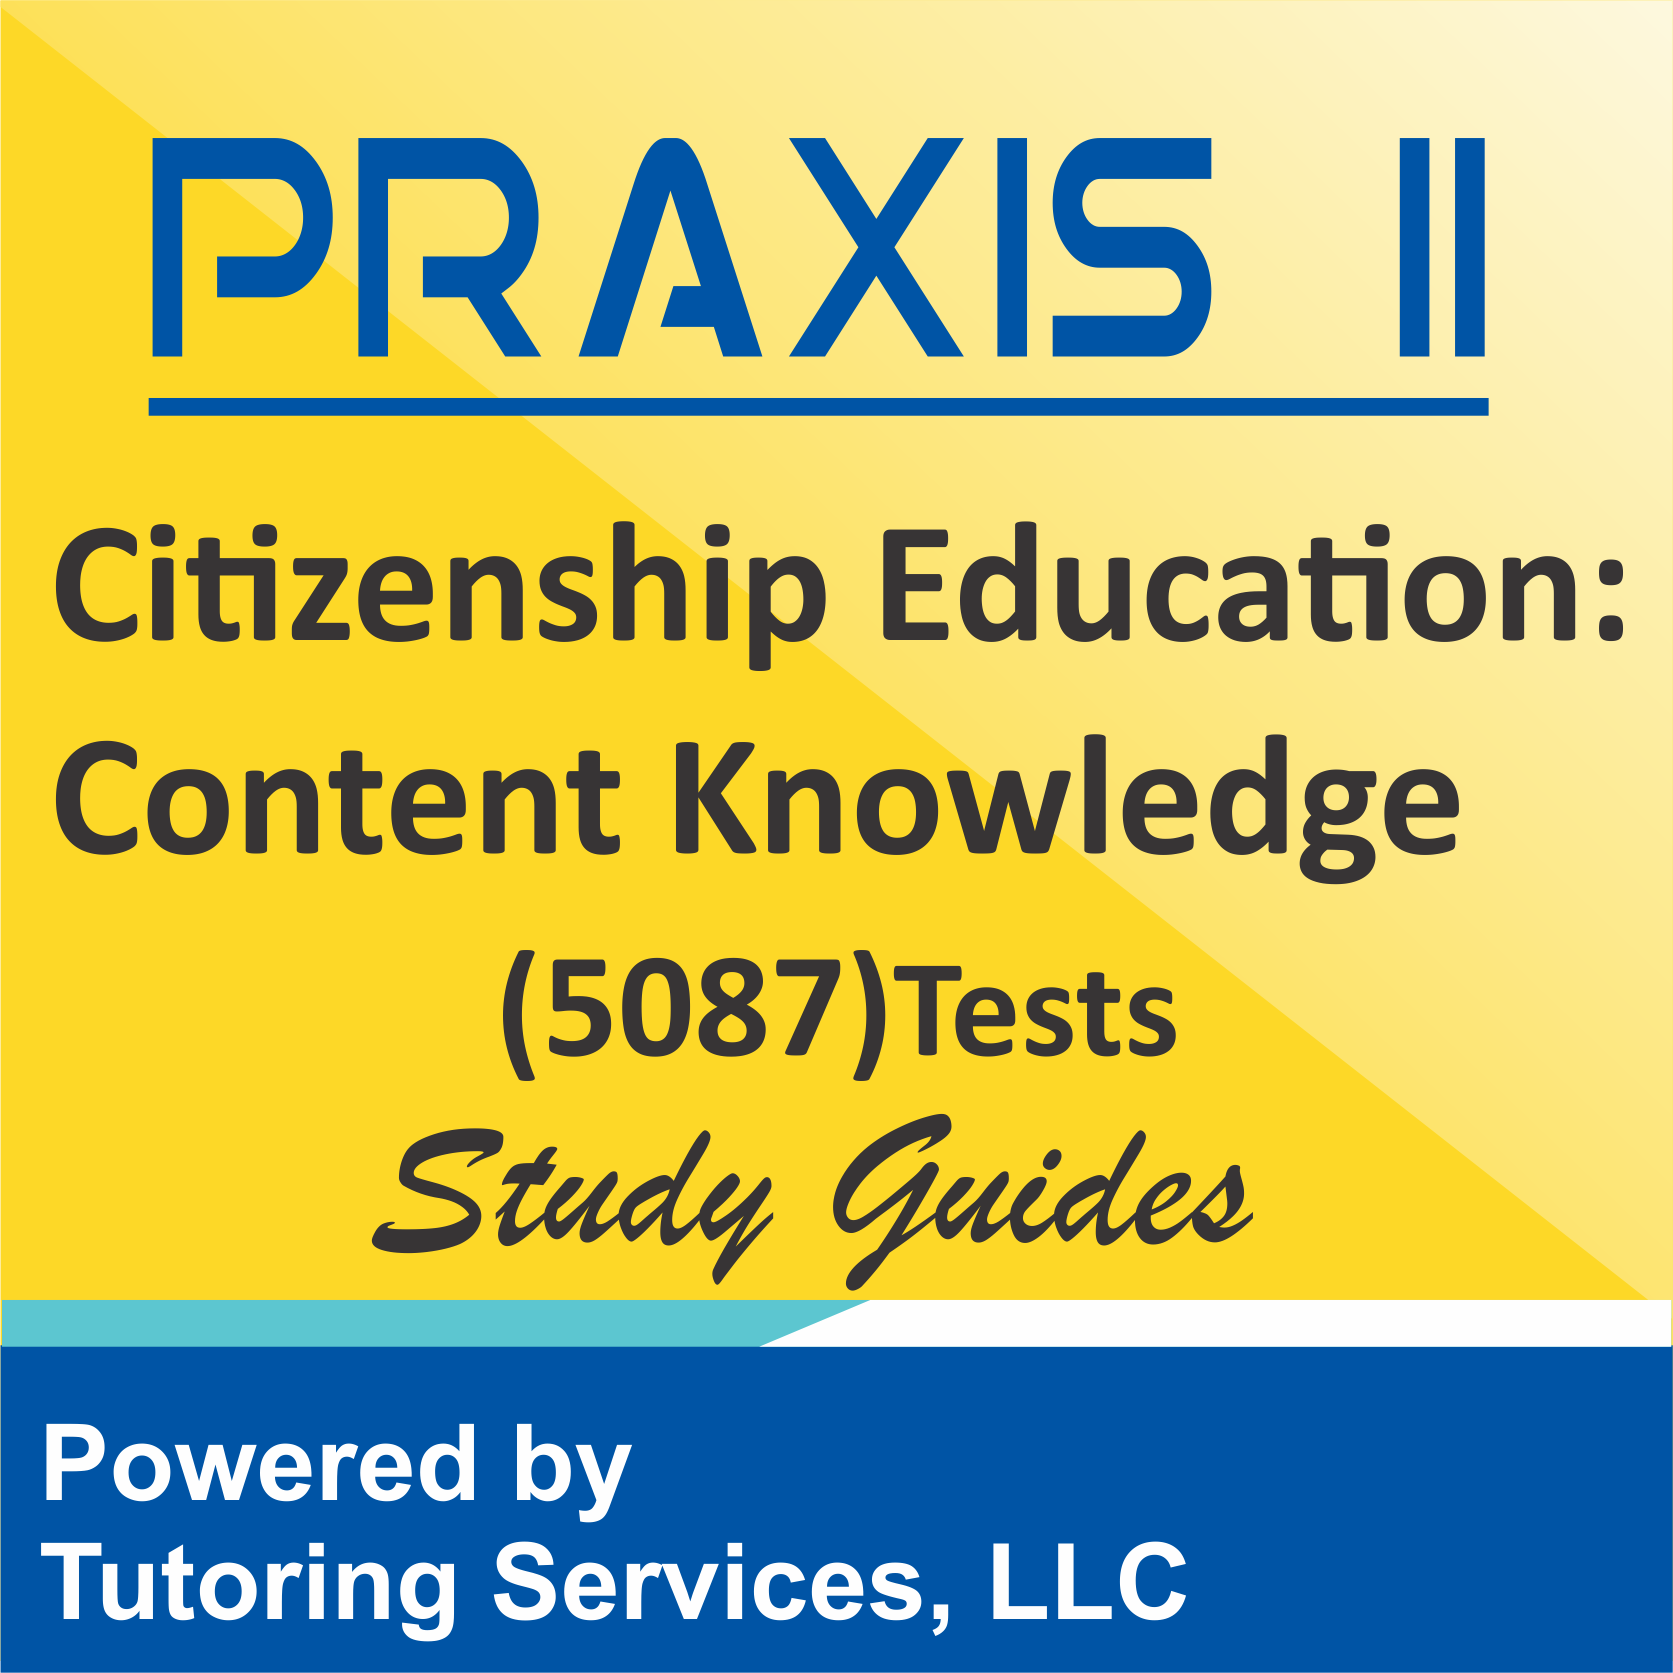 Praxis II Citizenship Education: Content Knowledge (5087) Examination Information